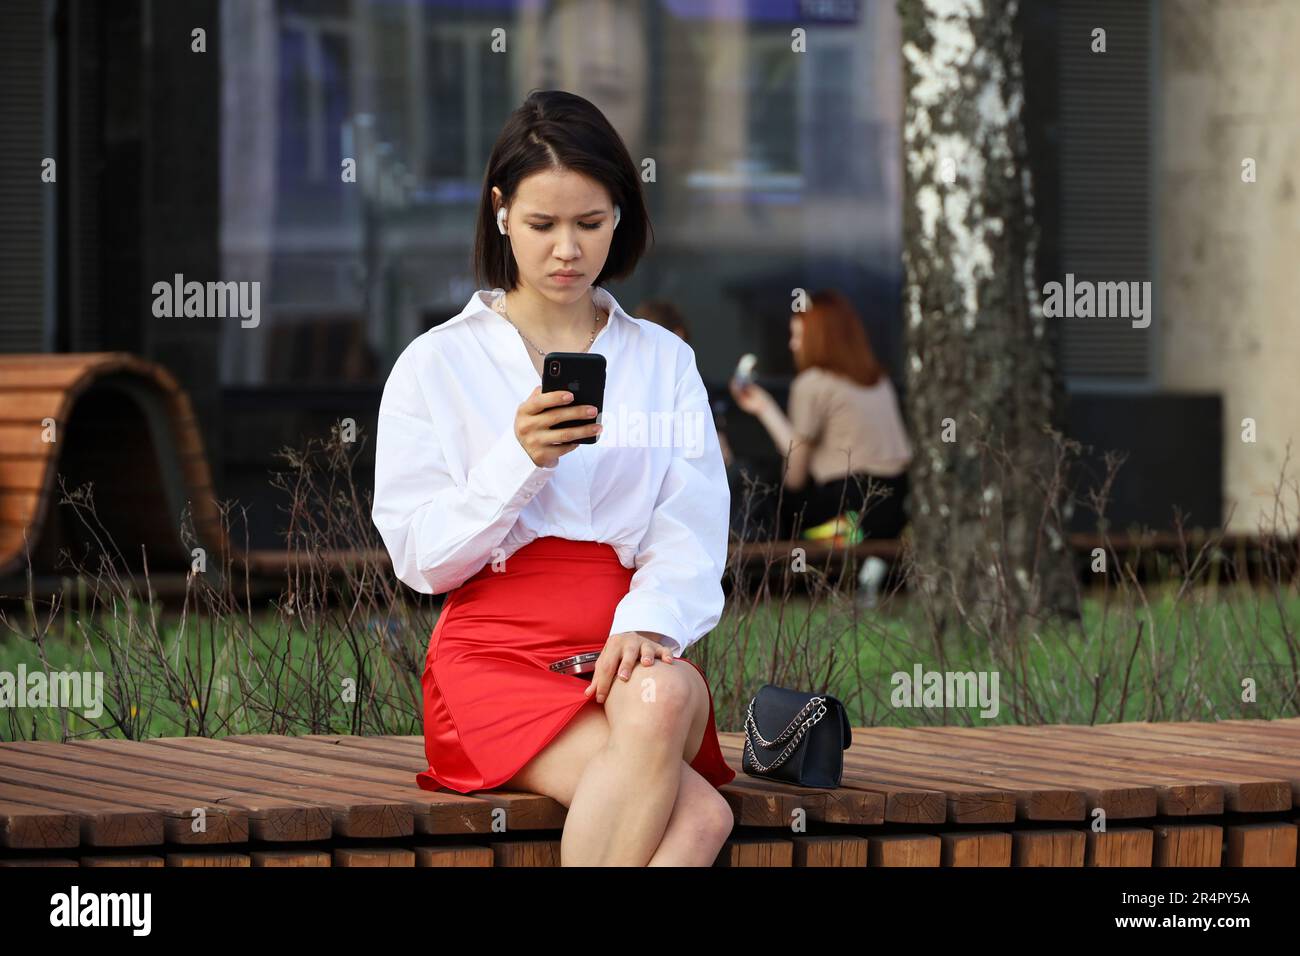 Girl in a white blouse and a red skirt using smartphone sitting on wooden bench on city street Stock Photo